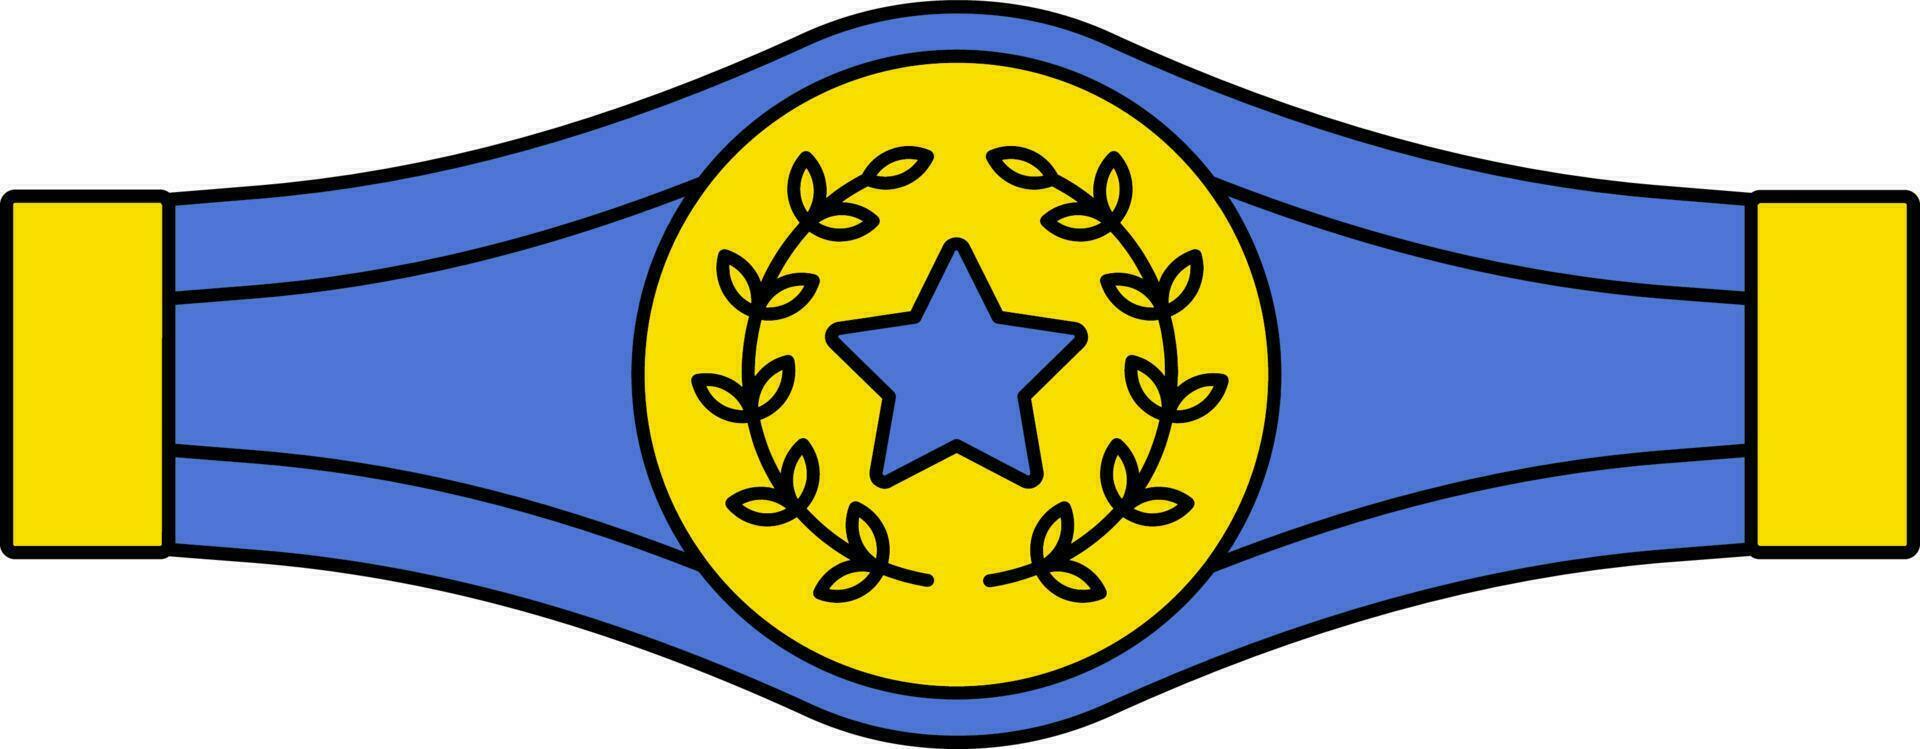 Award Or Champion Belt Icon In Blue And Yellow Color. vector